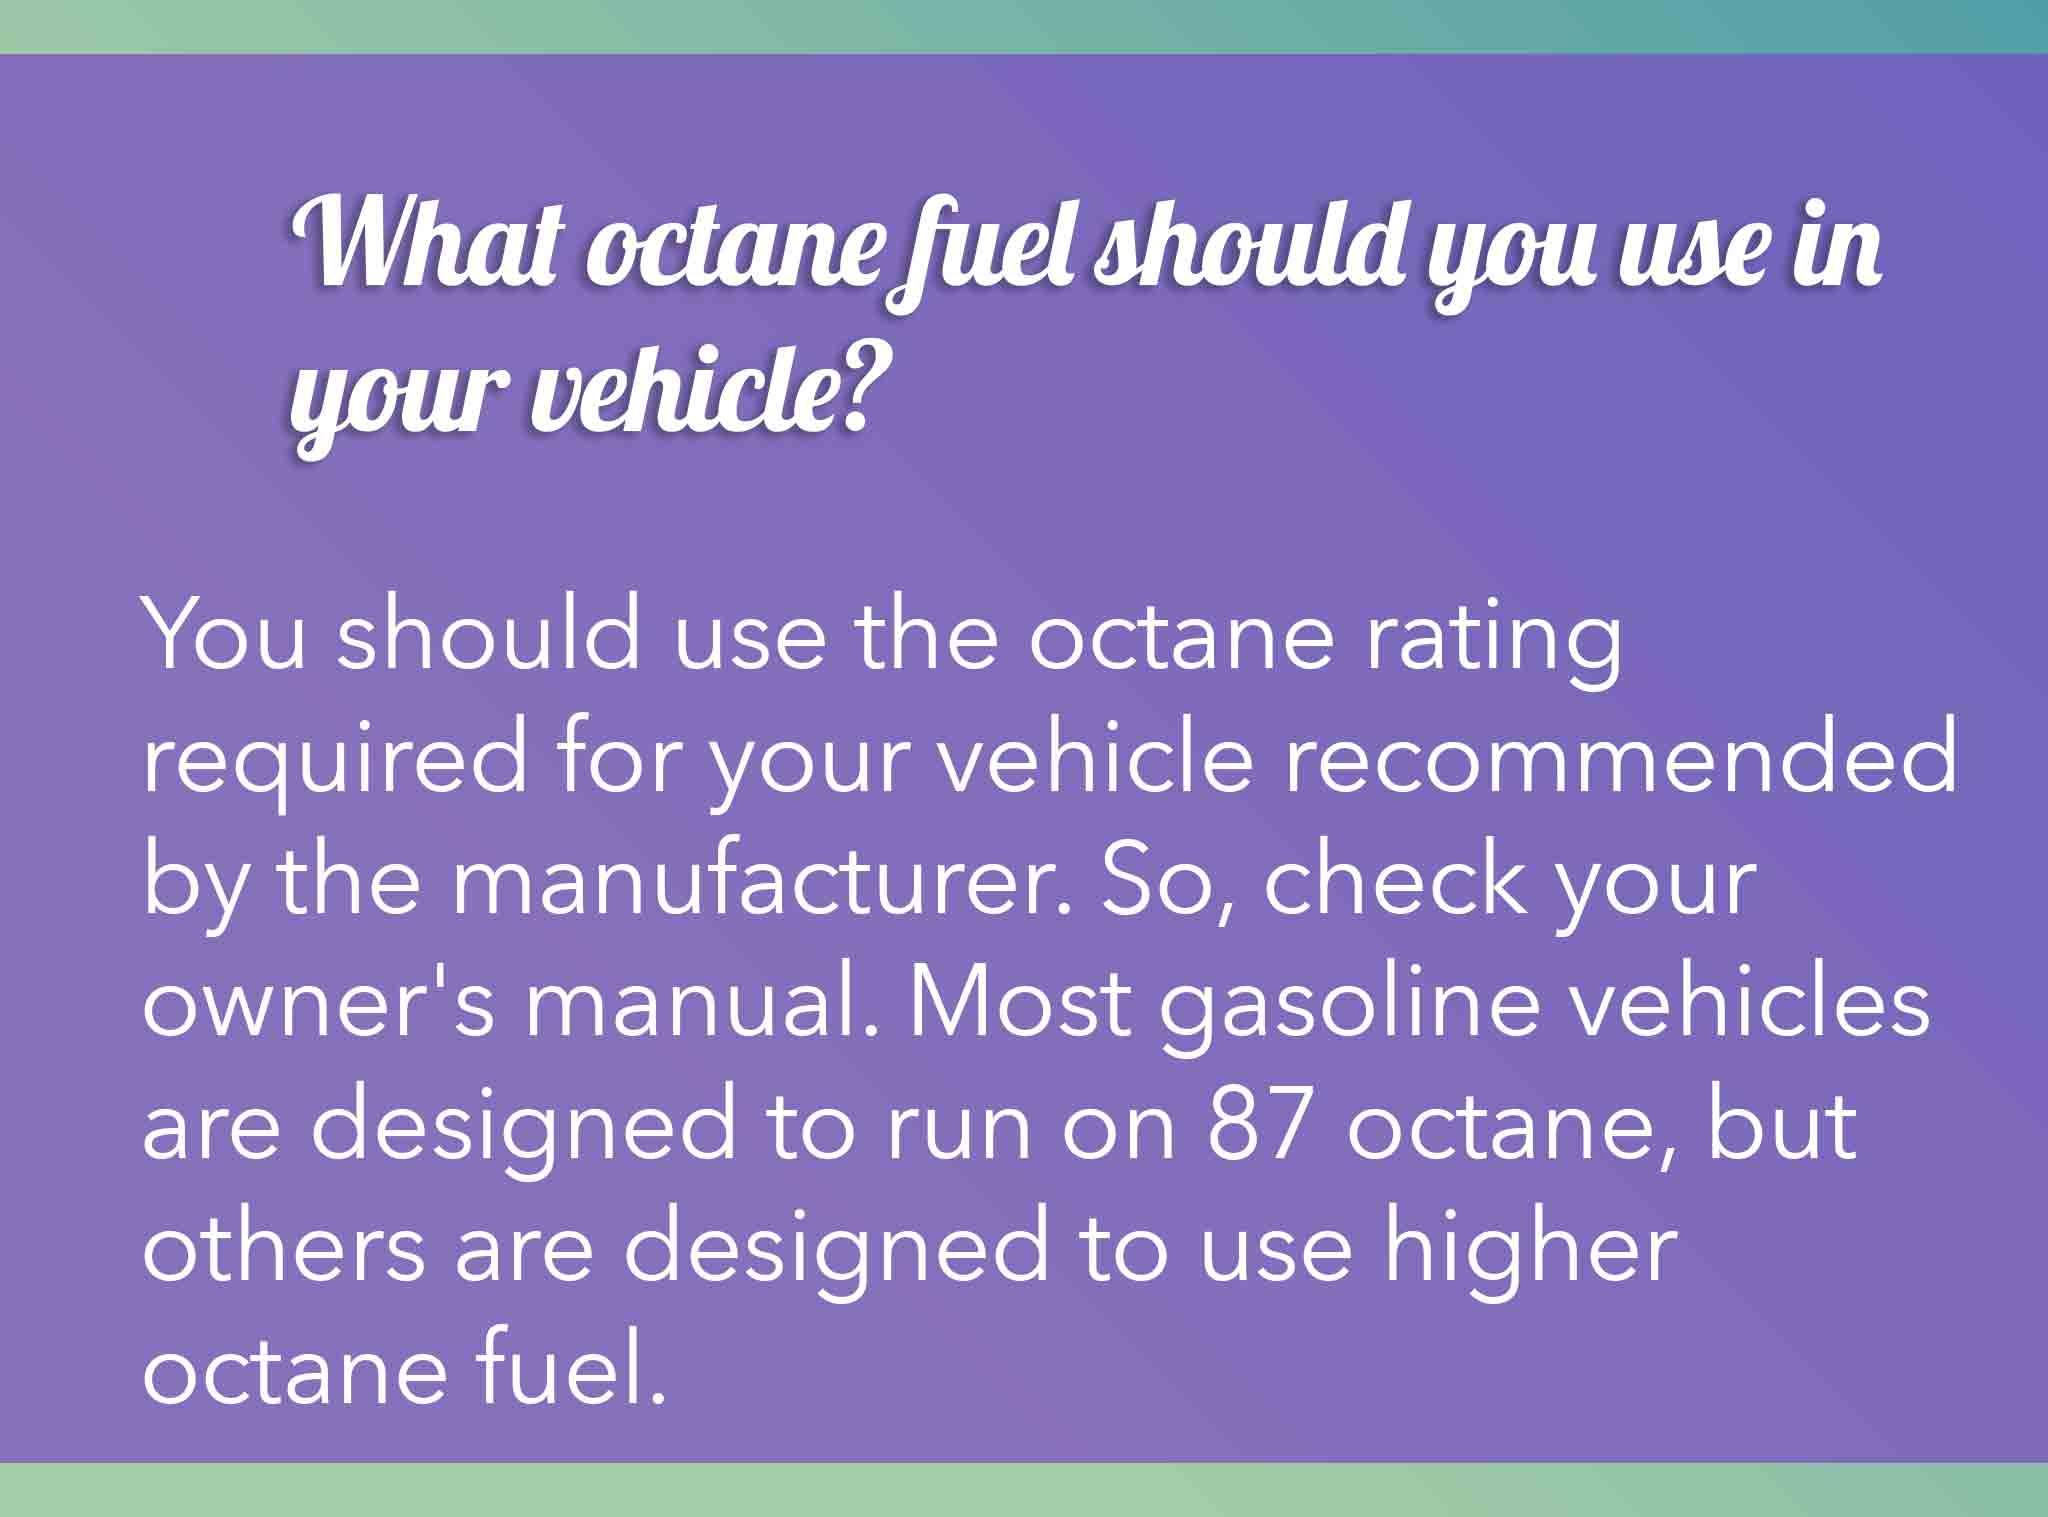 You should use the octane rating required for your vehicle recommended by the manufacturer. So, check your owner's manual. Most gasoline vehicles are designed to run on 87 octane, but others are designed to use higher octane fuel.